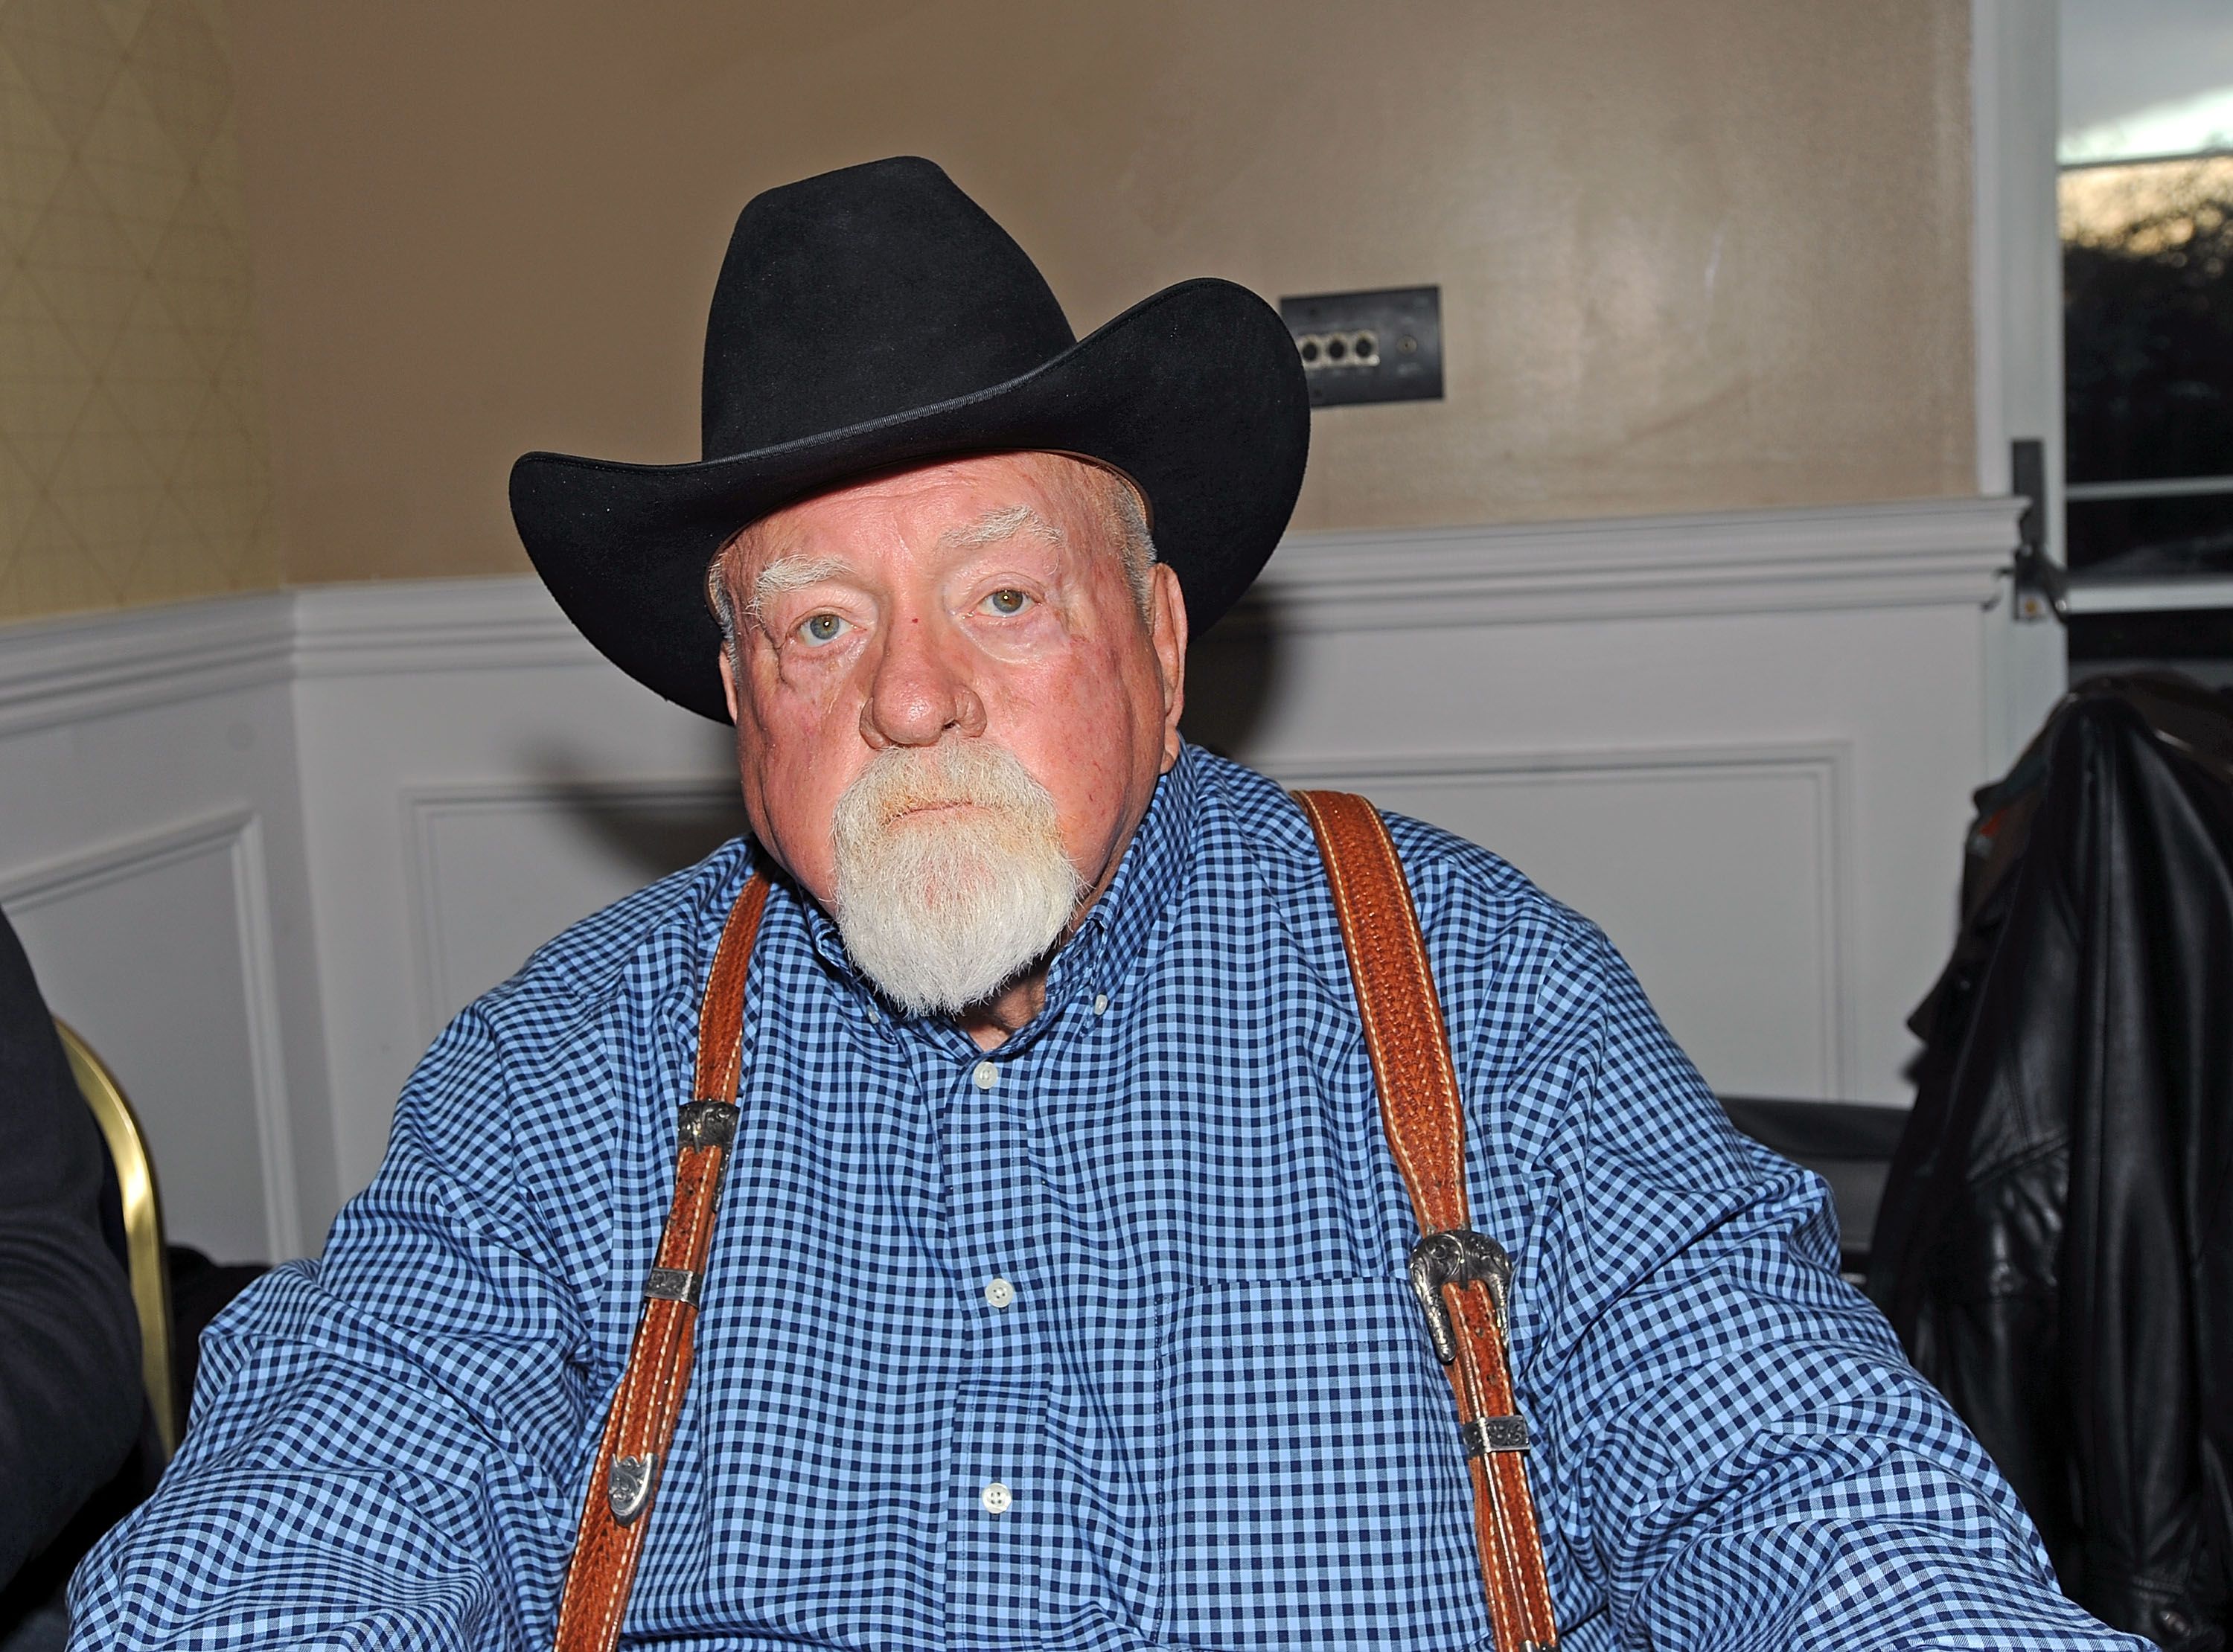 Actor Wilford Brimley at the 2017 Monster Mania Con at NJ Crowne Plaza Hotel in Cherry Hill, New Jersey | Photo:Getty Images